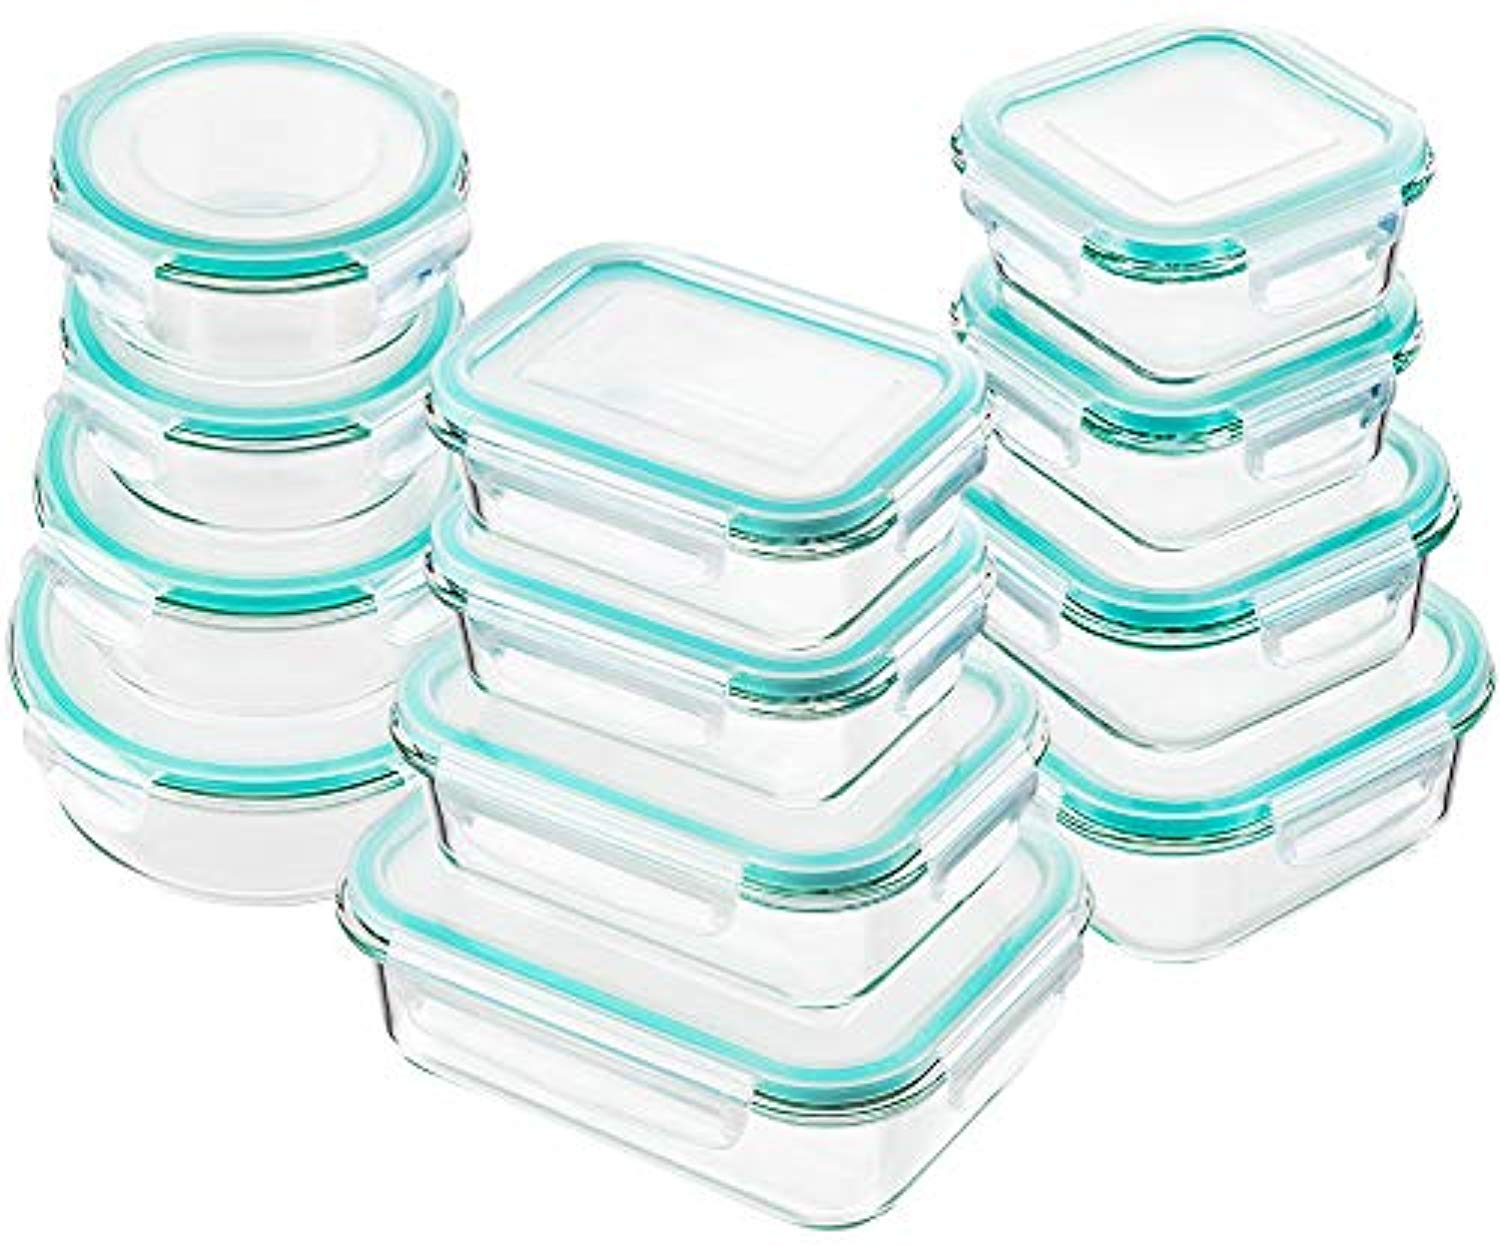 24-Piece Glass Food Storage Containers with Snap Locking Lids, Glass Meal Prep Containers Set - Airtight Lunch Containers, Dishwasher and Freezer Safe